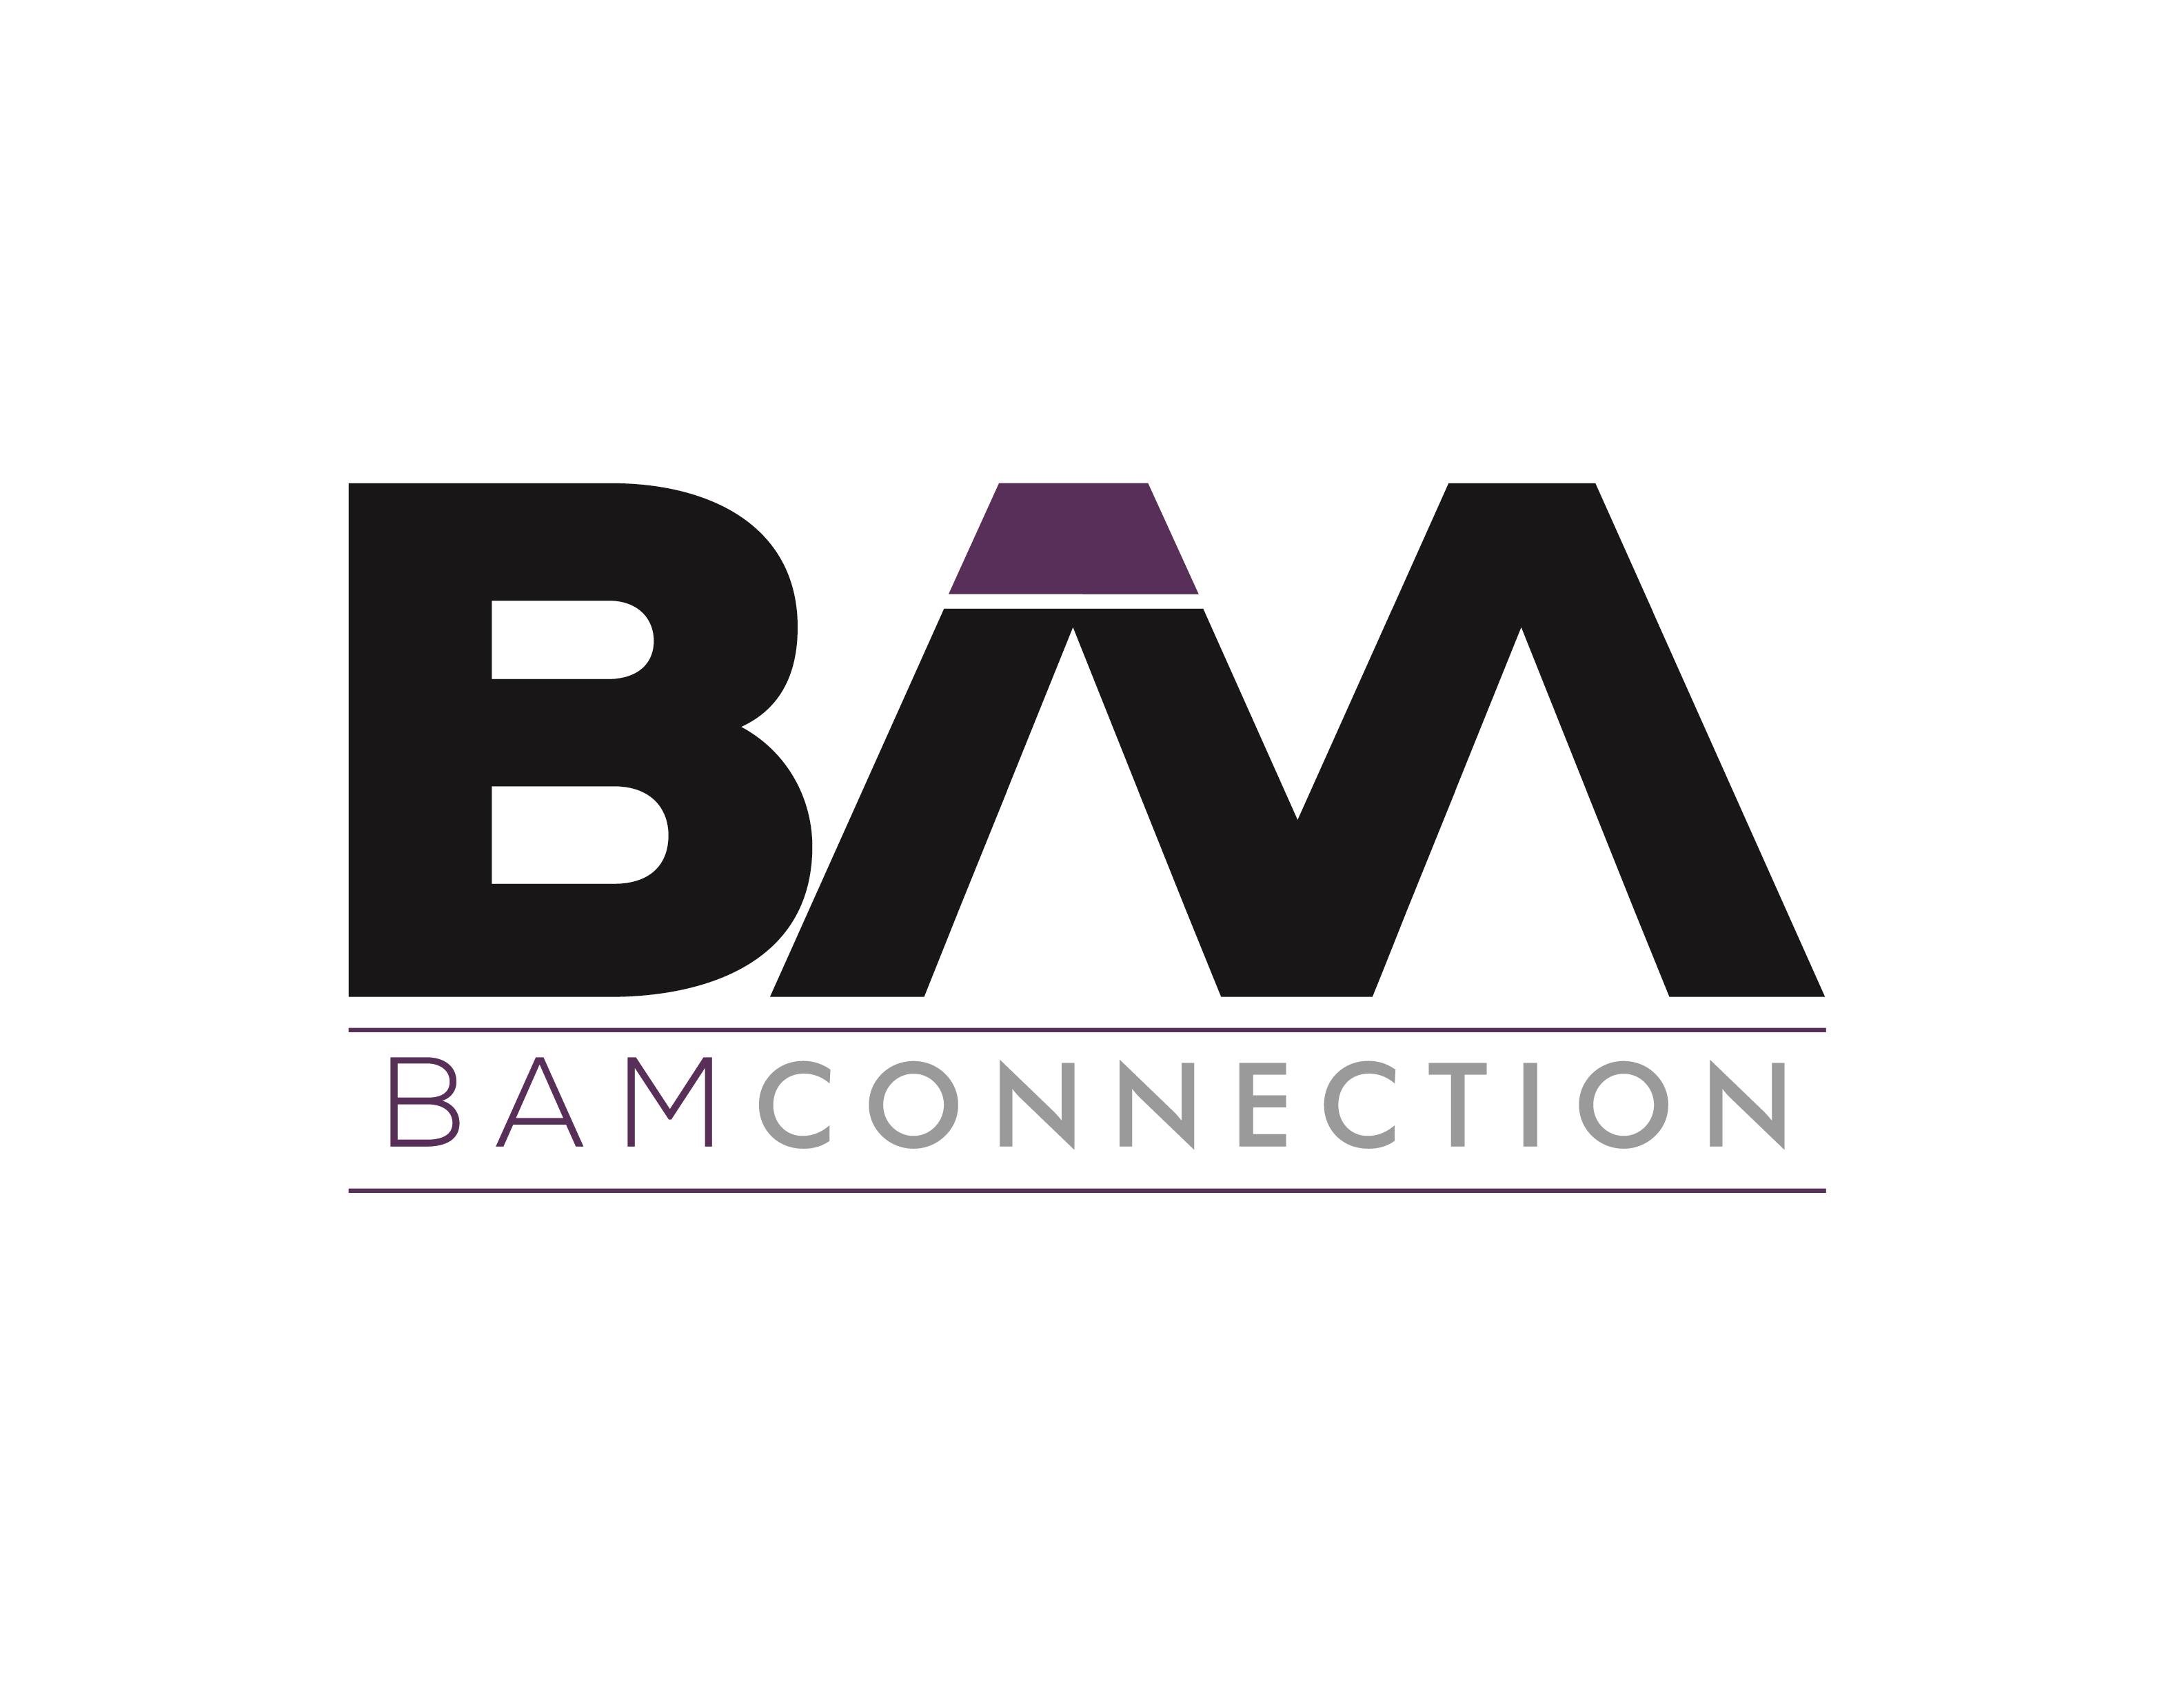 The BAM Connection